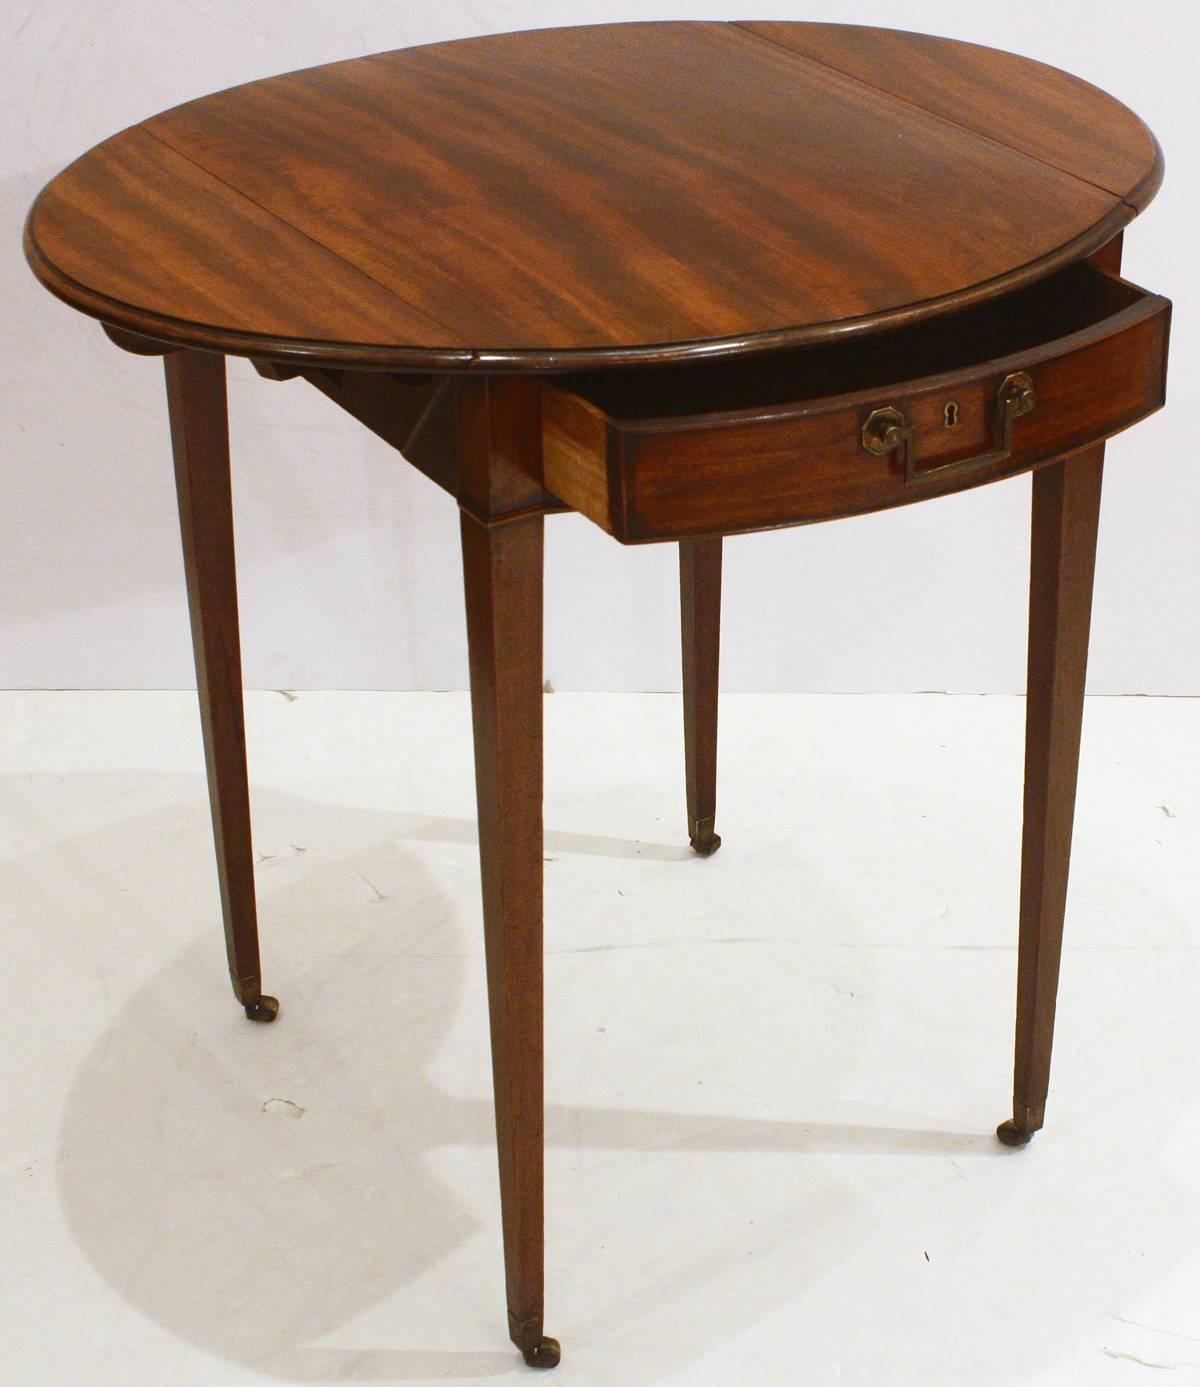 A Georgian pembroke table of figured mahogany with one bowed drawer with cockbeading, small drop leaves (oval when leaves are up), and tapered pencil legs with small castors.

Measures: 19